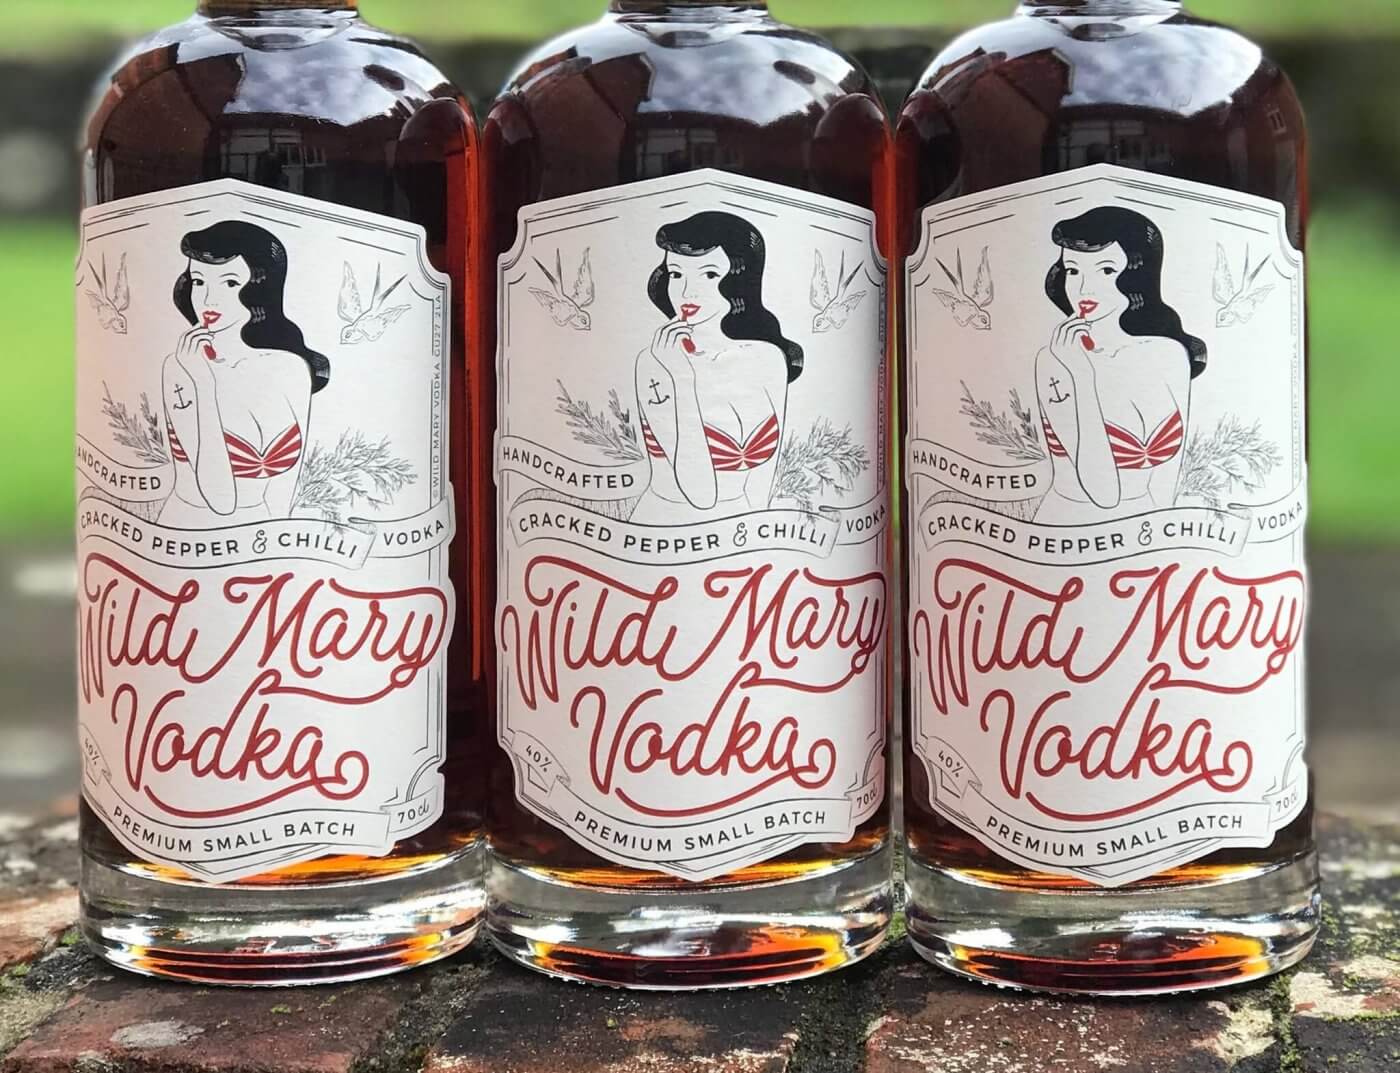 Wild Mary Vodka | The Mustcard